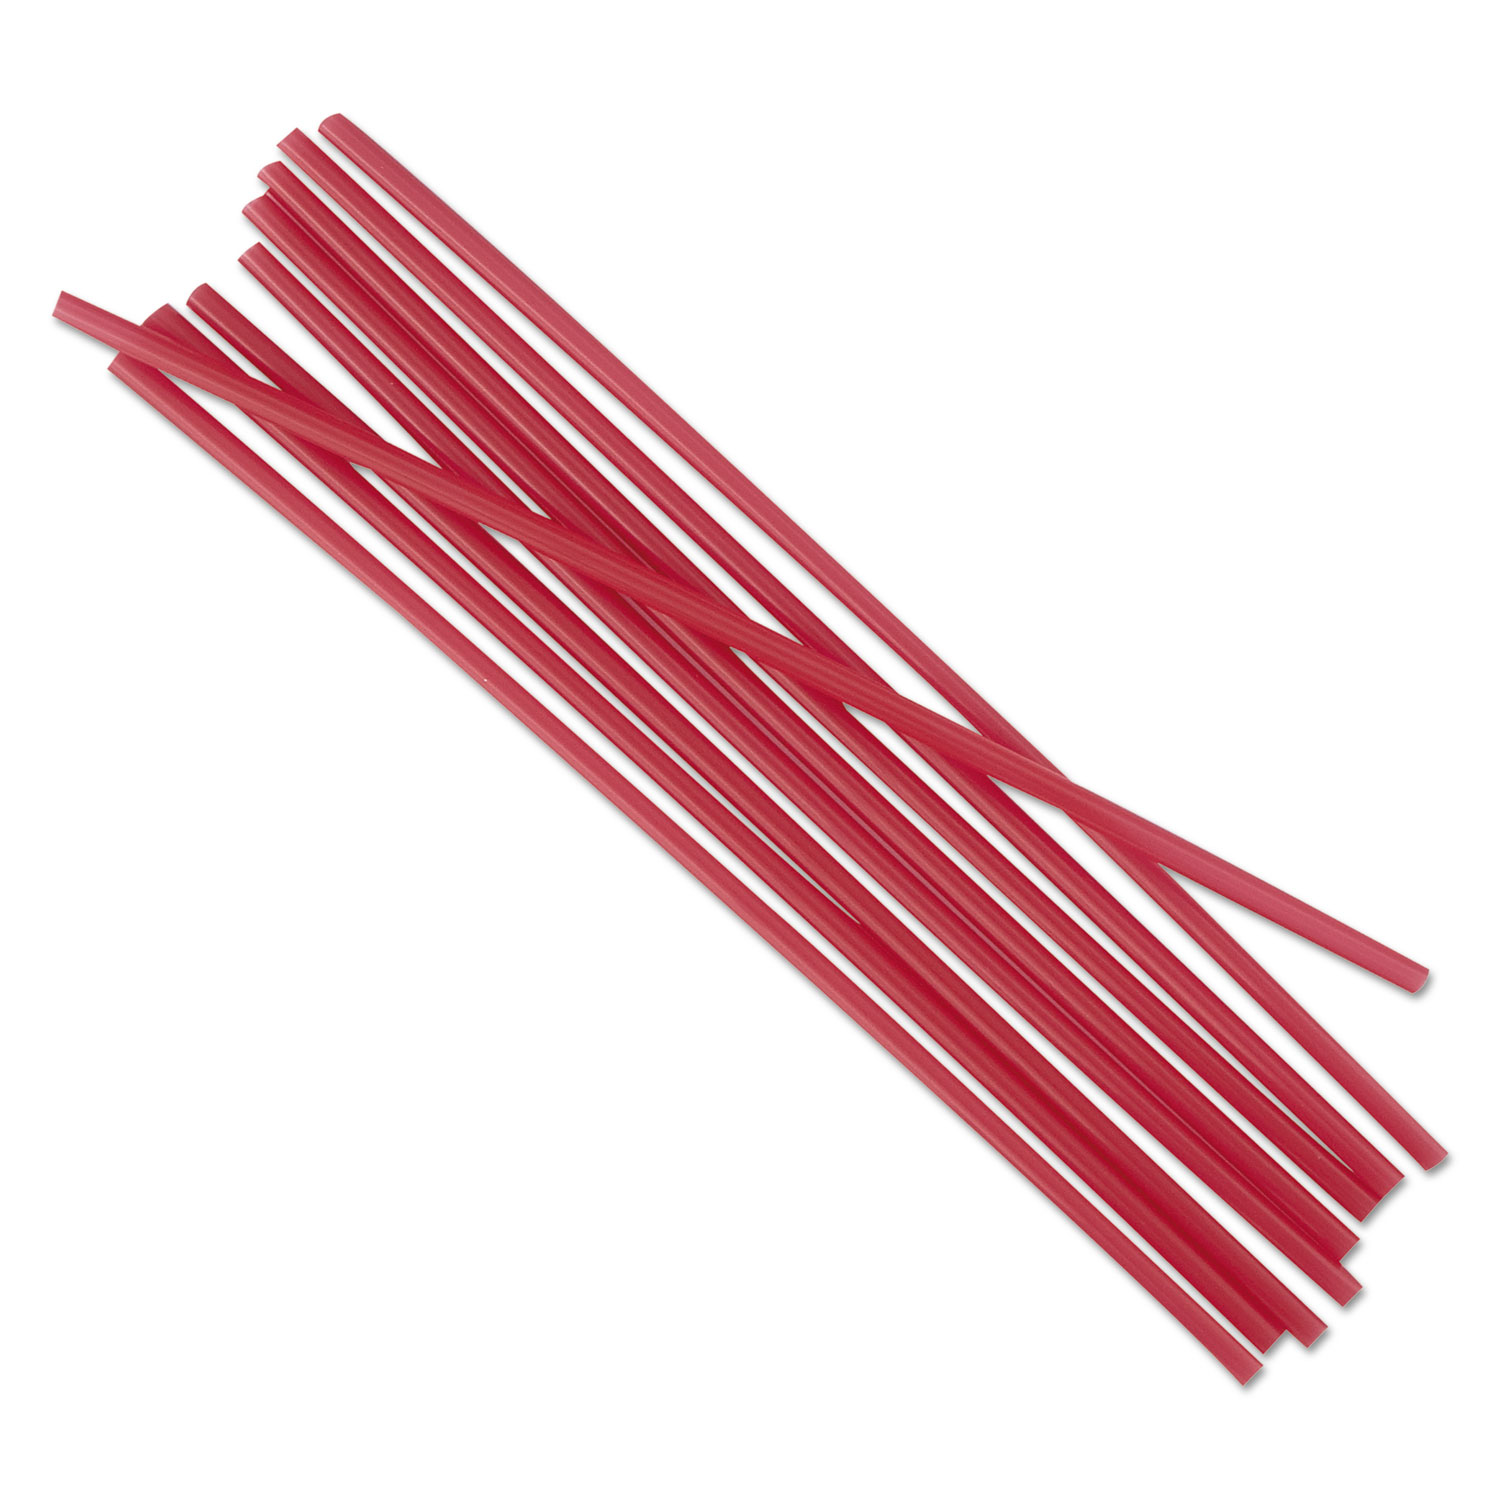 Unwrapped Single-Tube Stir-Straws, 5 1/4, Red, 1000/Pack